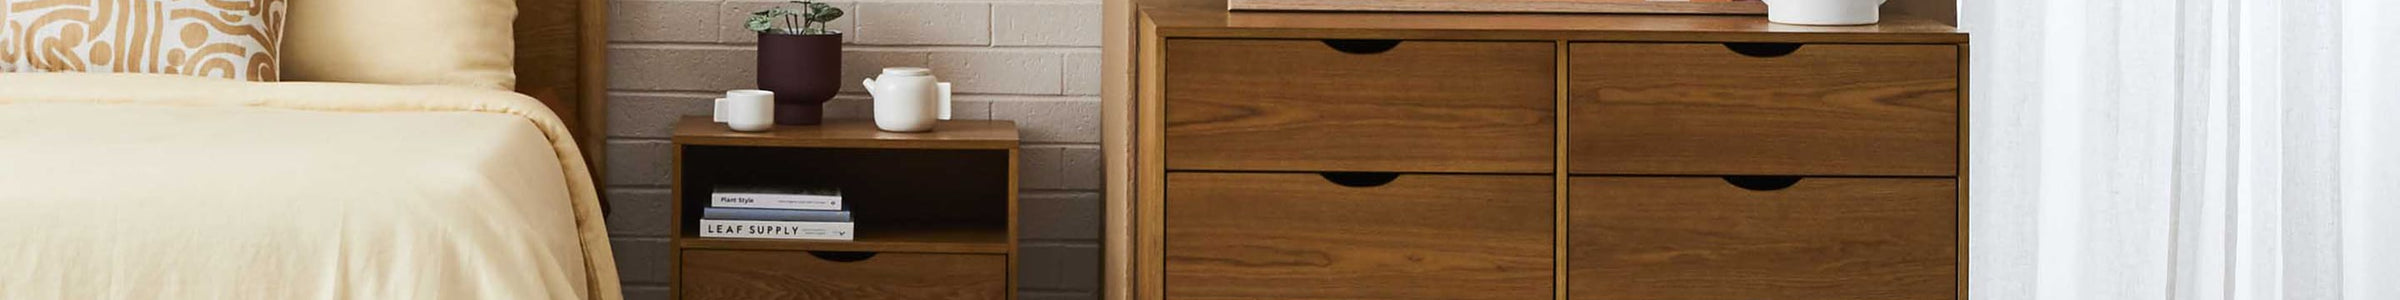 Browse our Bedroom Storage collection online